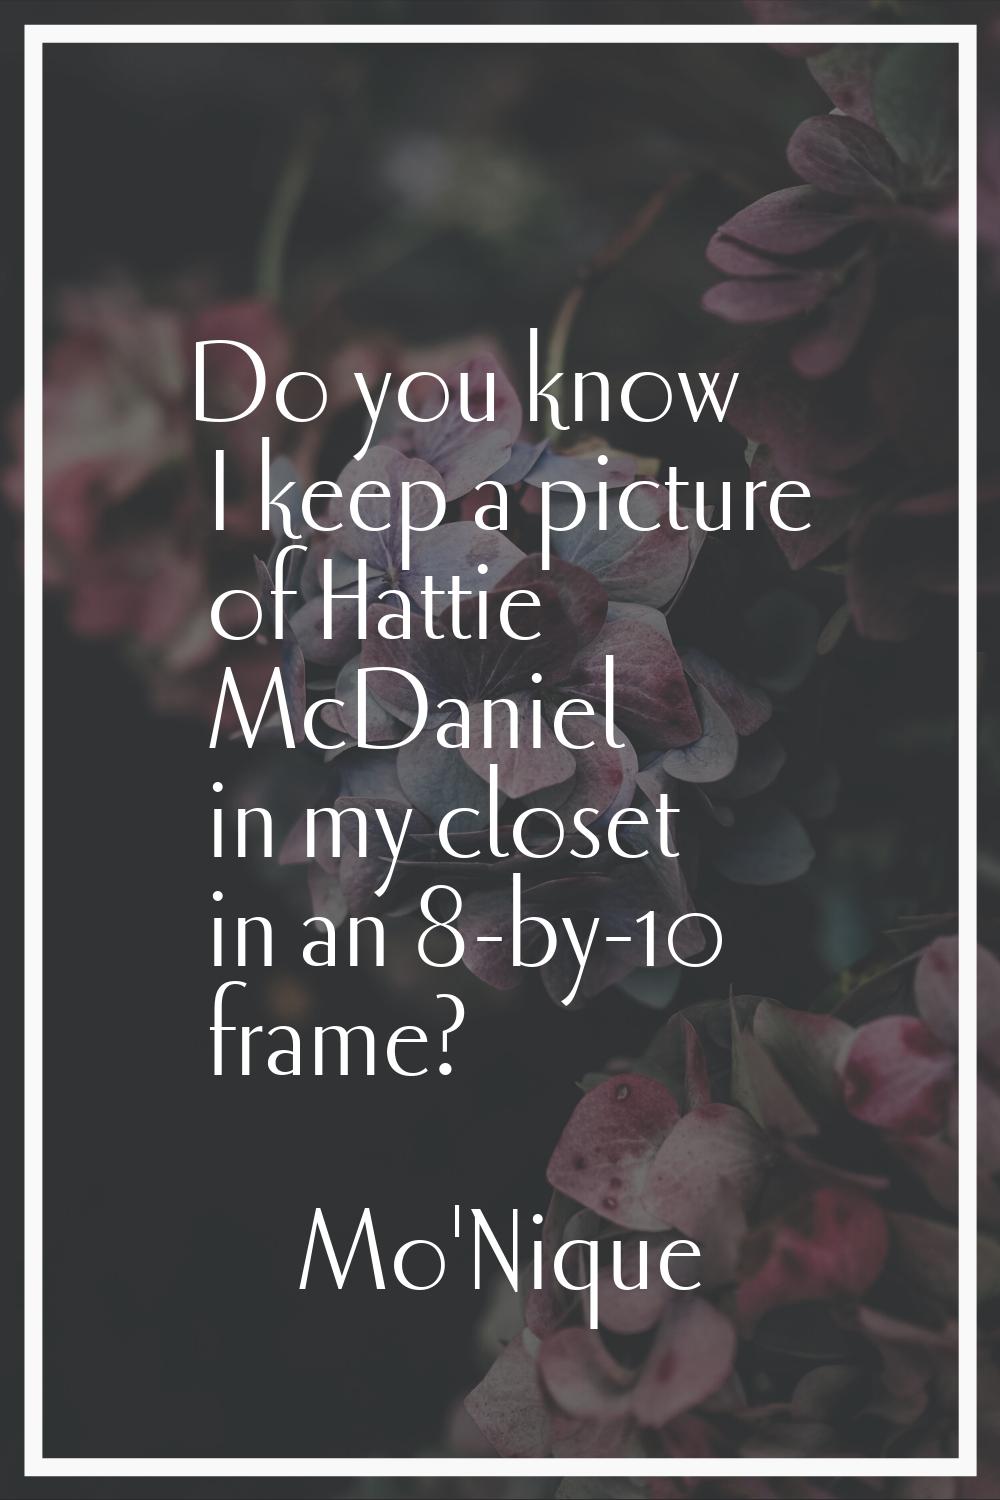 Do you know I keep a picture of Hattie McDaniel in my closet in an 8-by-10 frame?